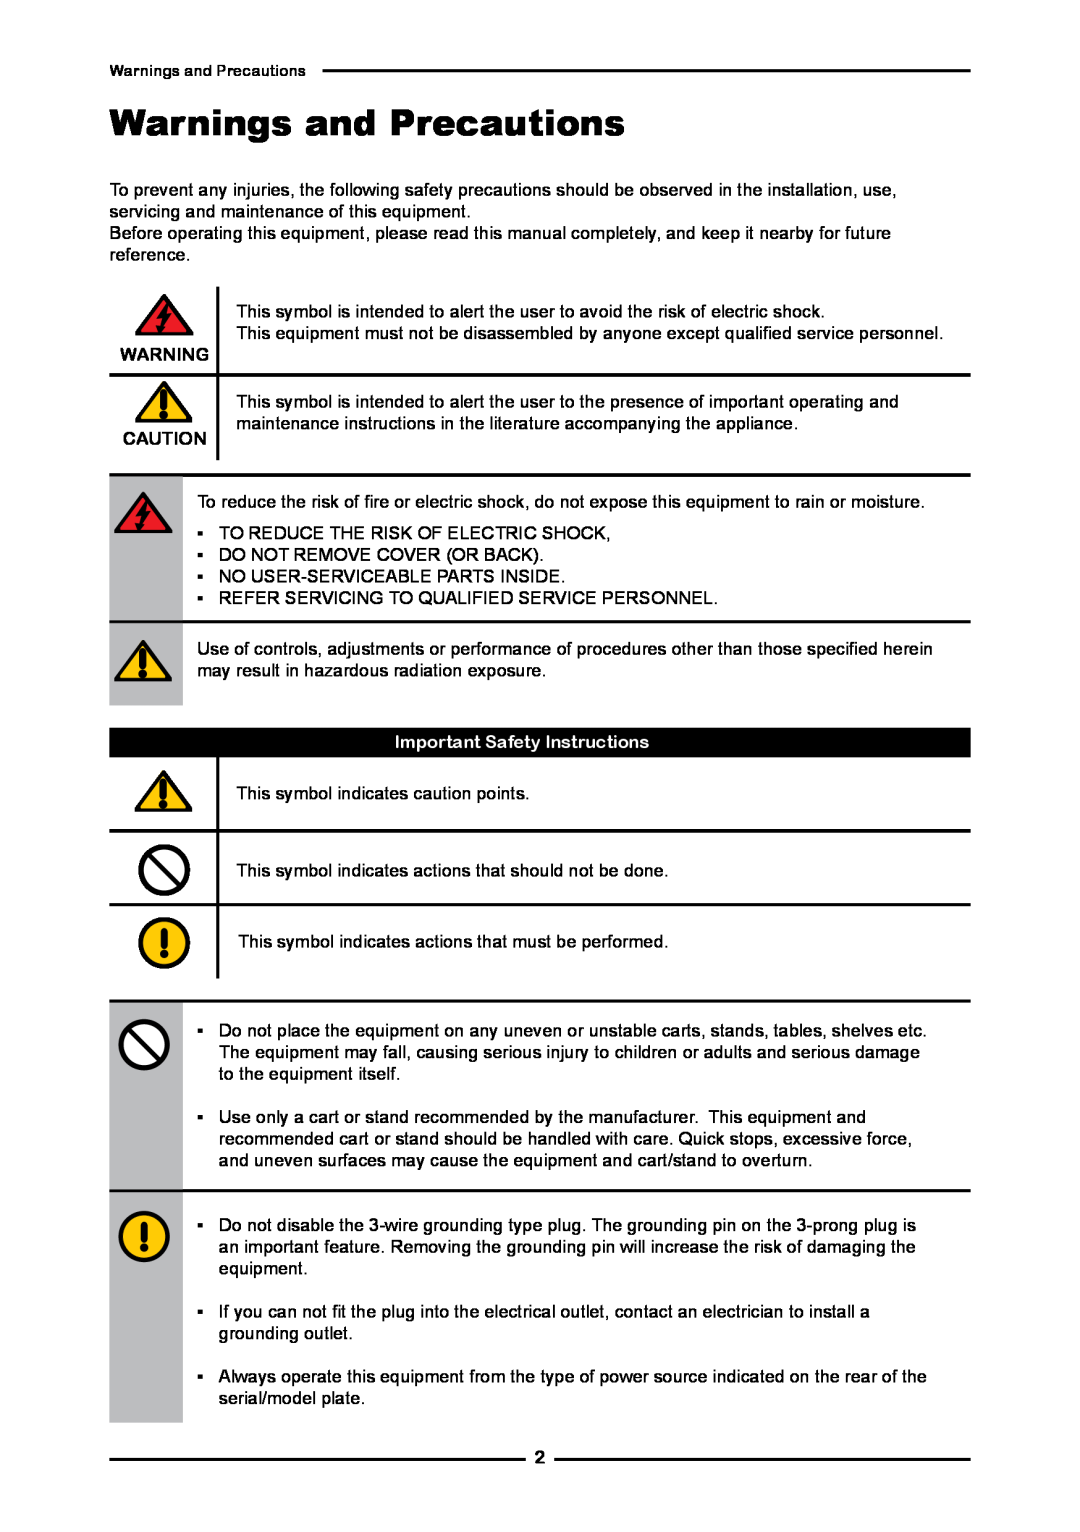 Polaroid FLM-3232 manual Warnings and Precautions, Important Safety Instructions 